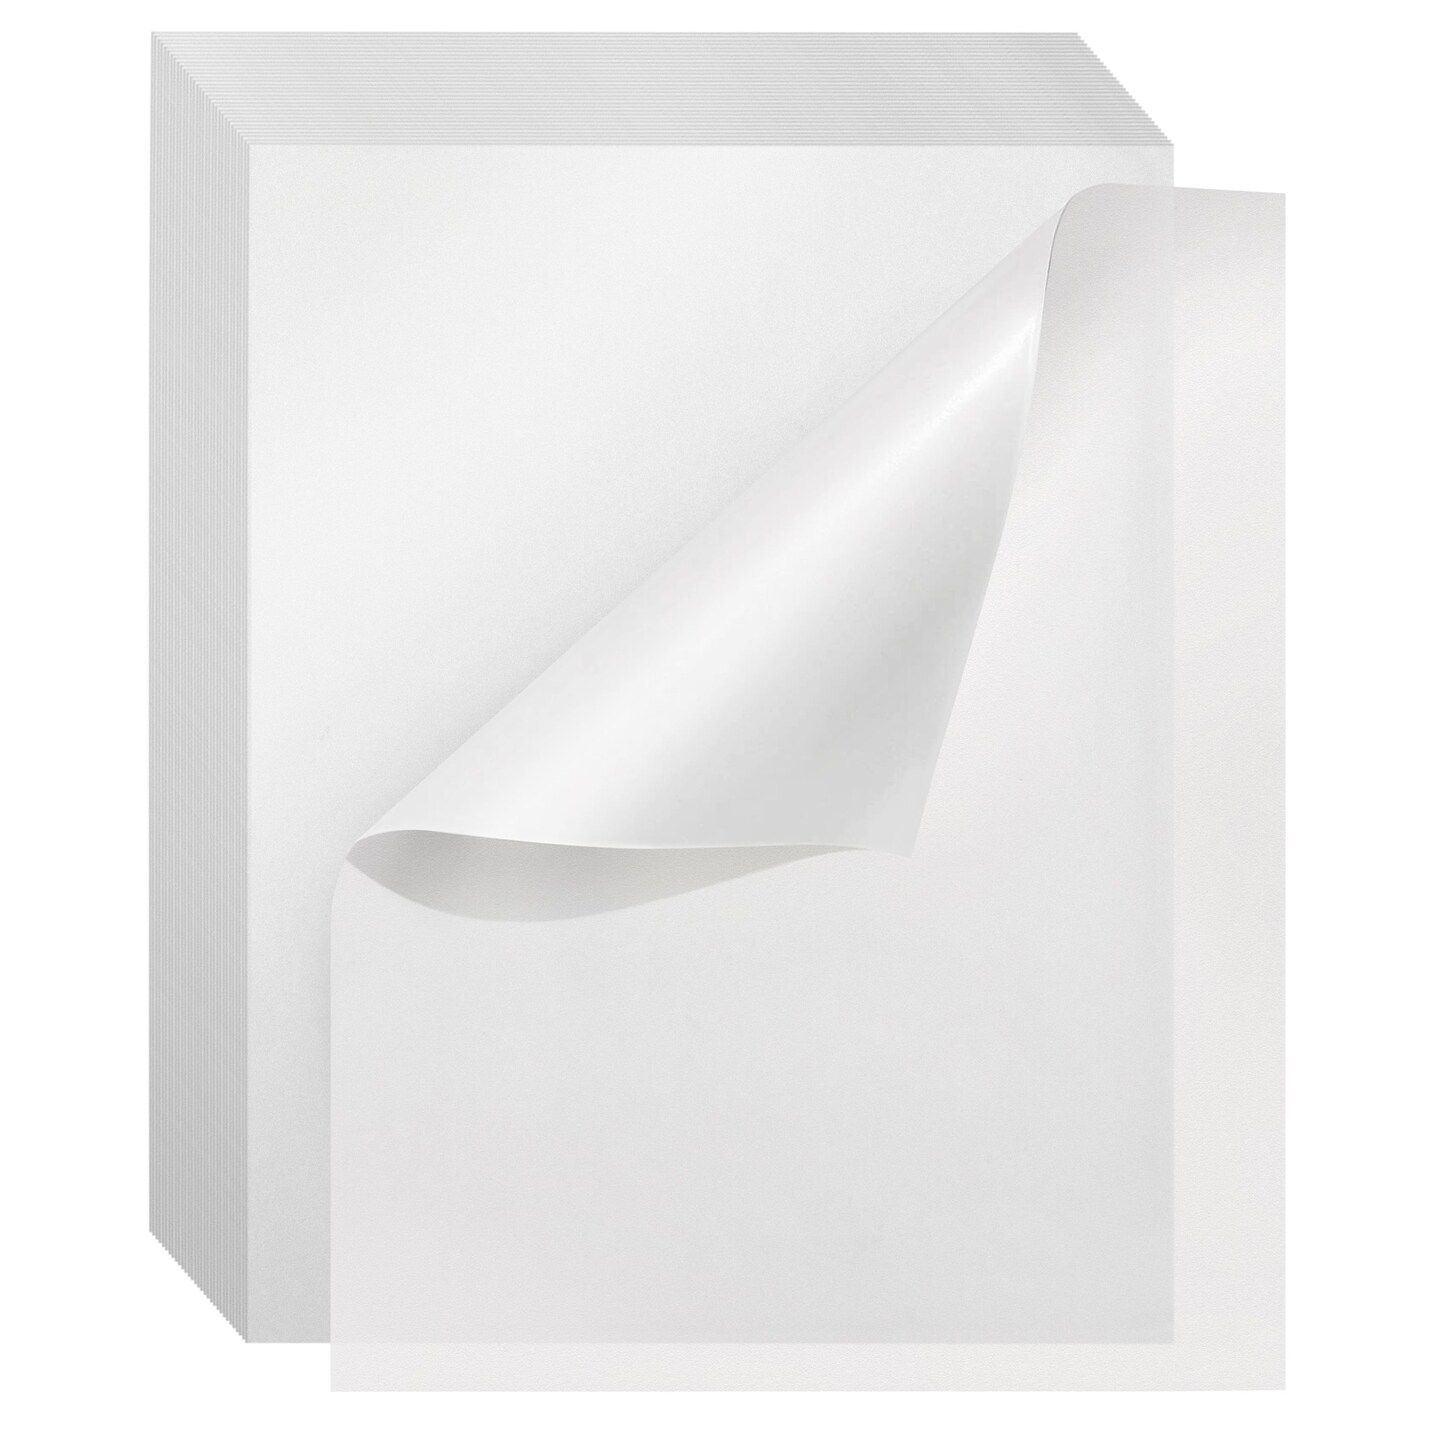 100 Pack Glassine Paper Sheets (8.5 x 11 In) - Onion Skin Paper